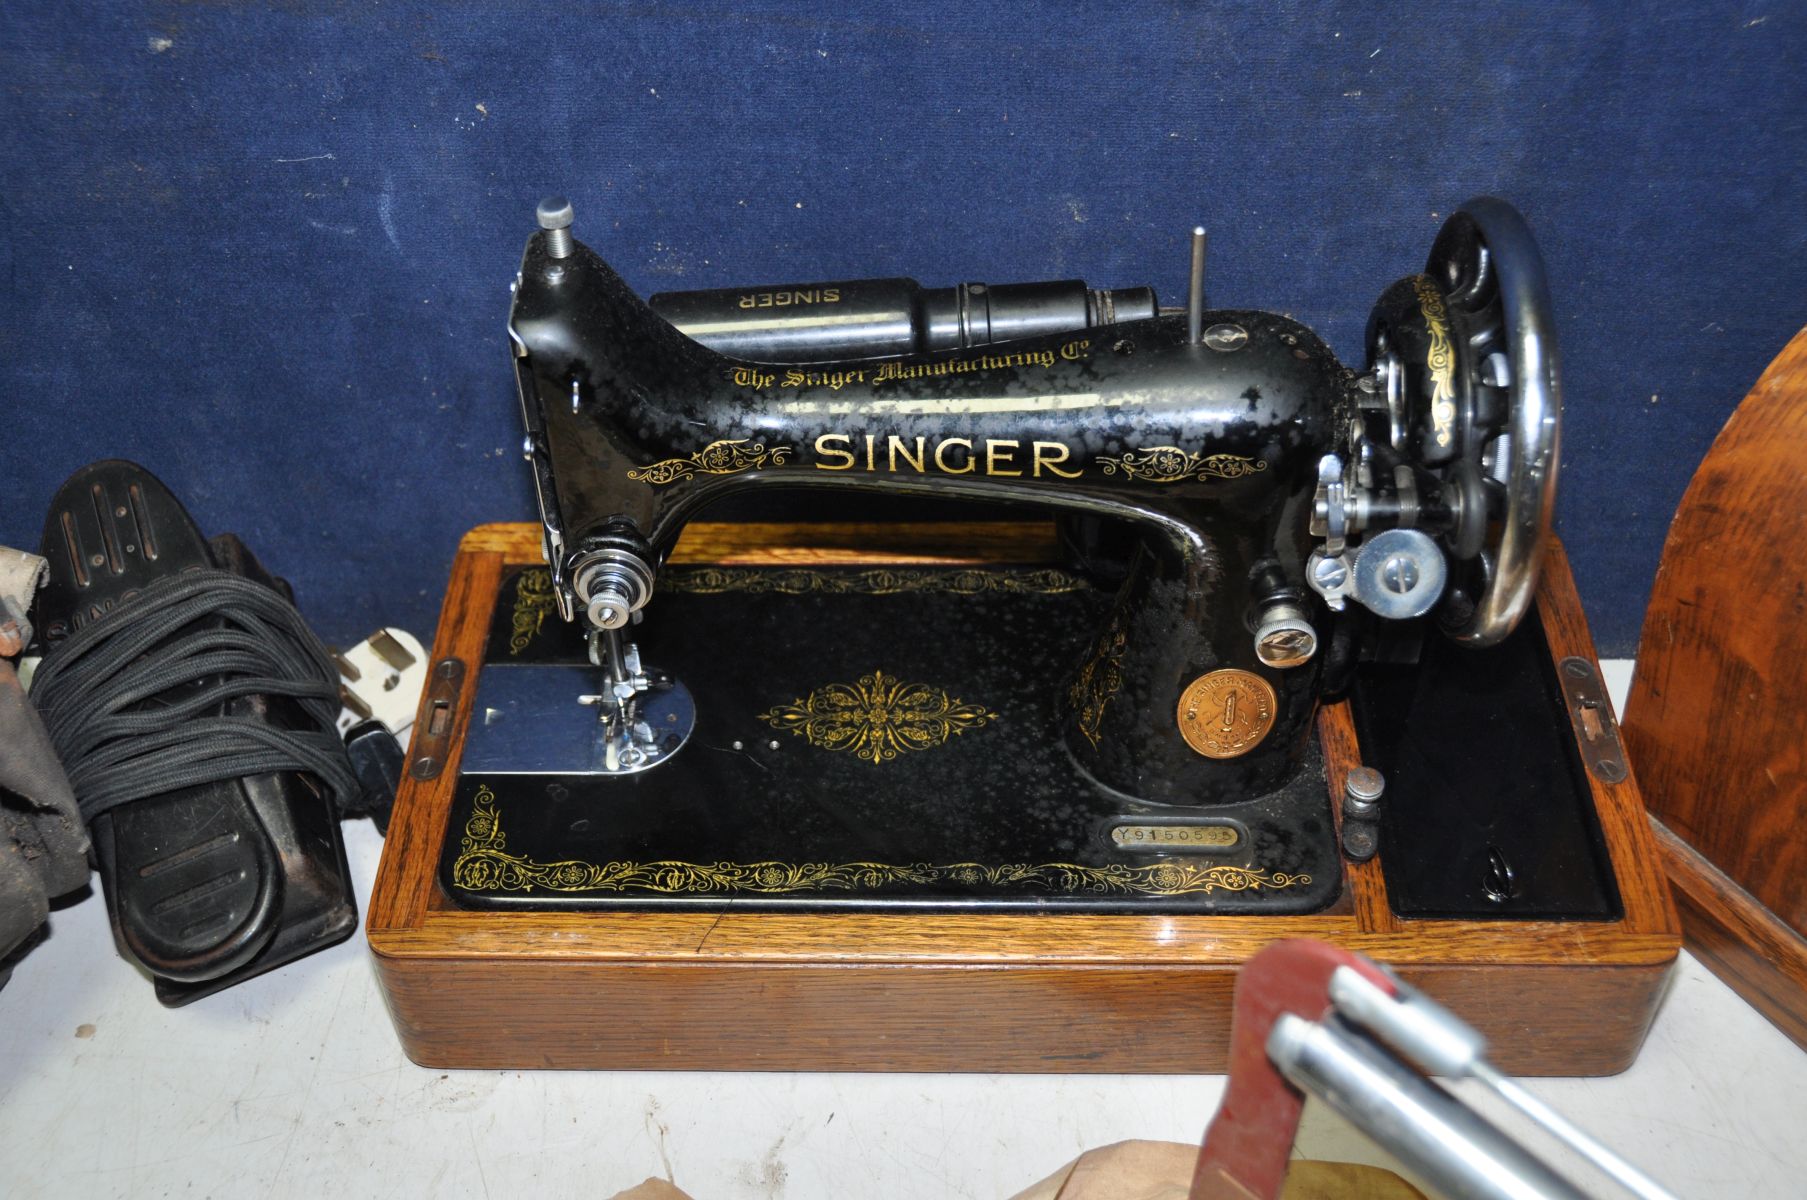 A SINGER SEWING MACHINE with foot peddle along with a bag containing vintage bicycle parts a - Image 2 of 4